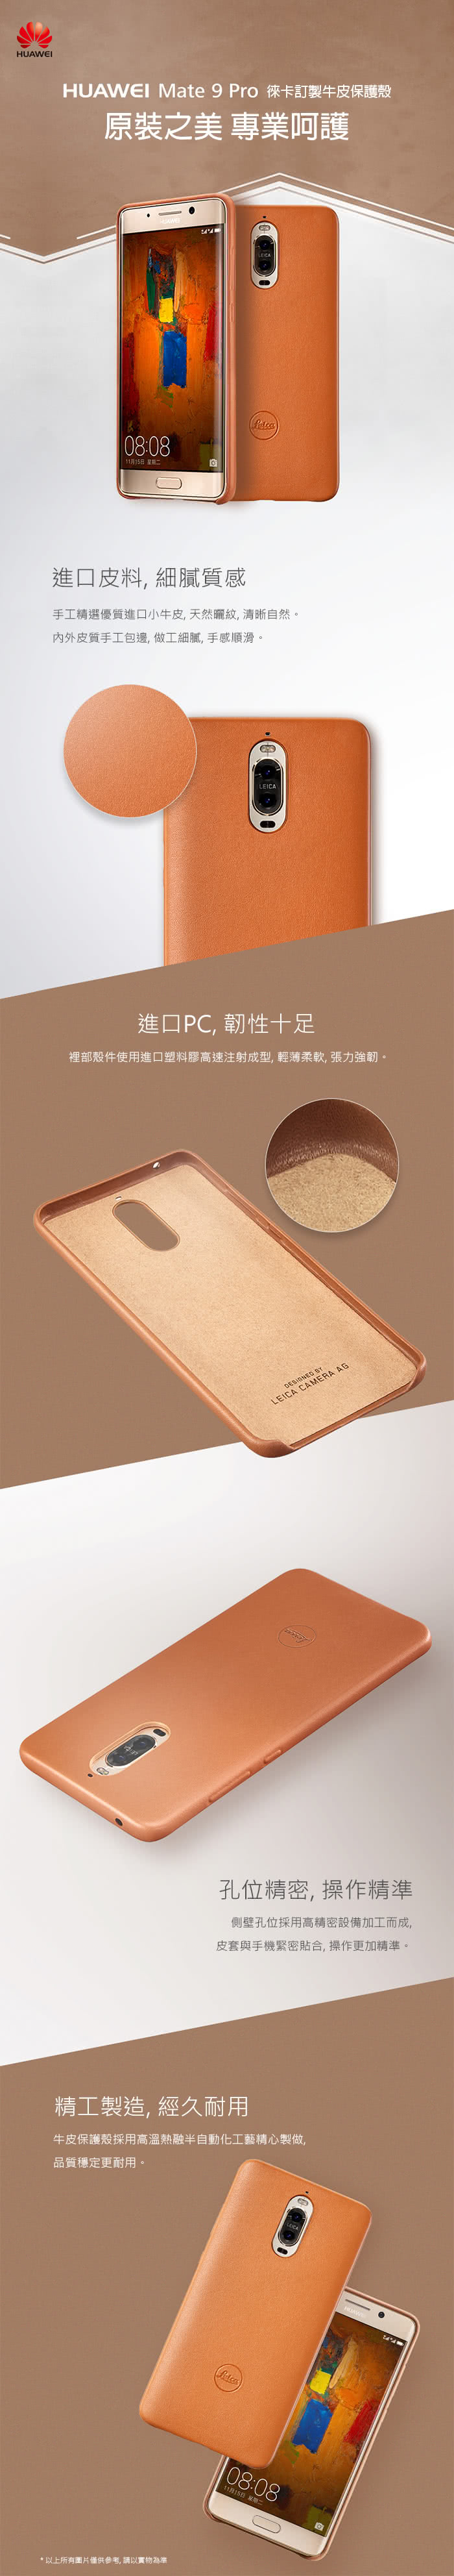 huawei_mate9pro_leather_case_brown.jpg?t=1520073541565